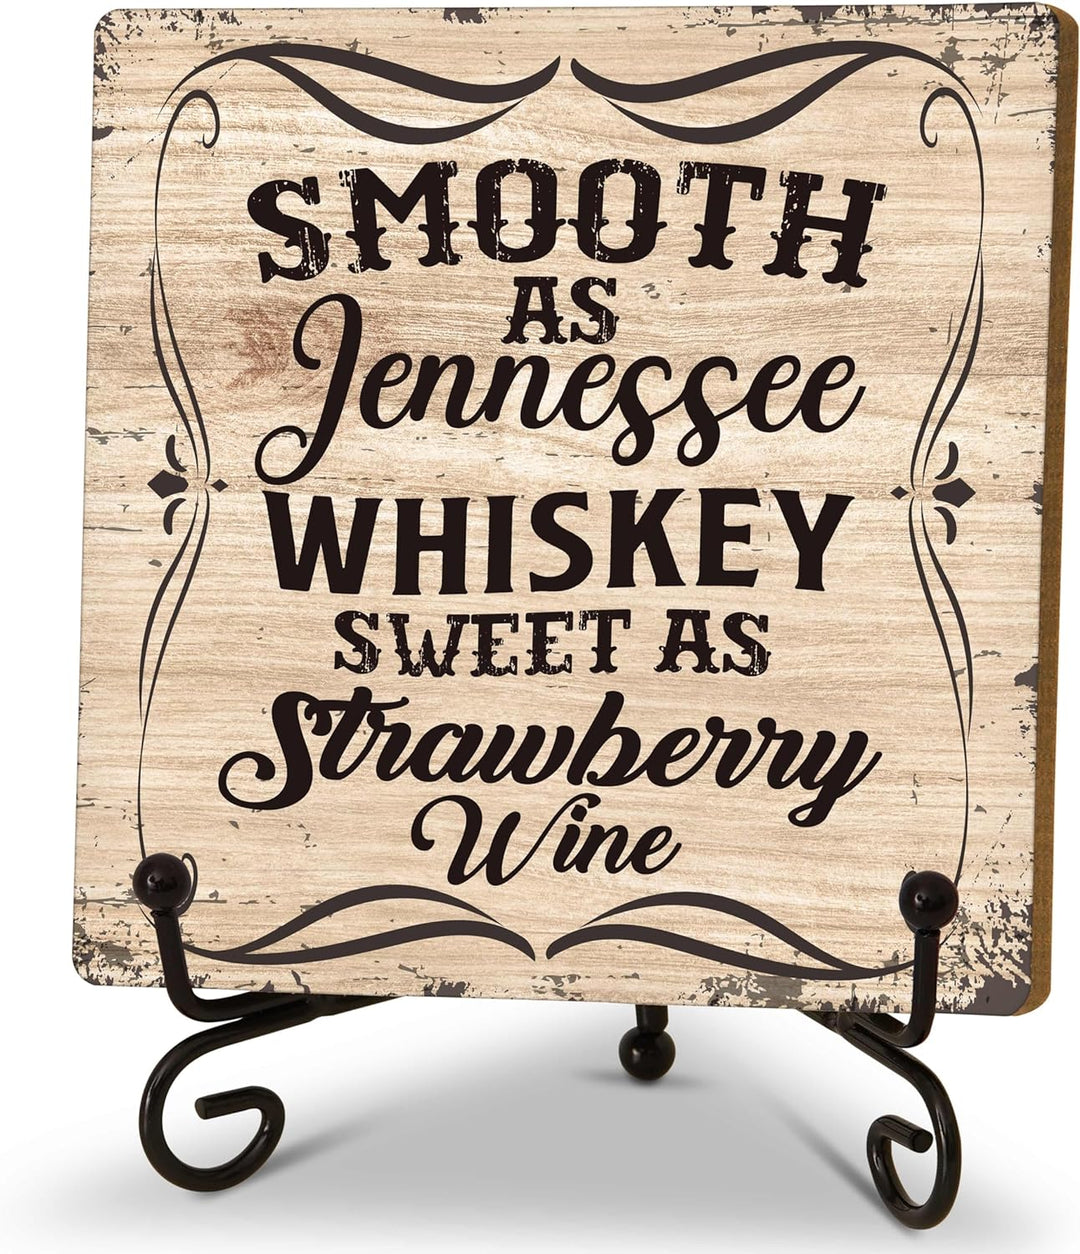 Smooth as Tennessee Whiskey Sweet as Strawberry Wine Sign, Coffee Bar Sign, Retro Country Western Decor, Whiskey Lover Gift, Home Office Room Desk Decor, Wood Plaque Sign with Metal Stand (D04)